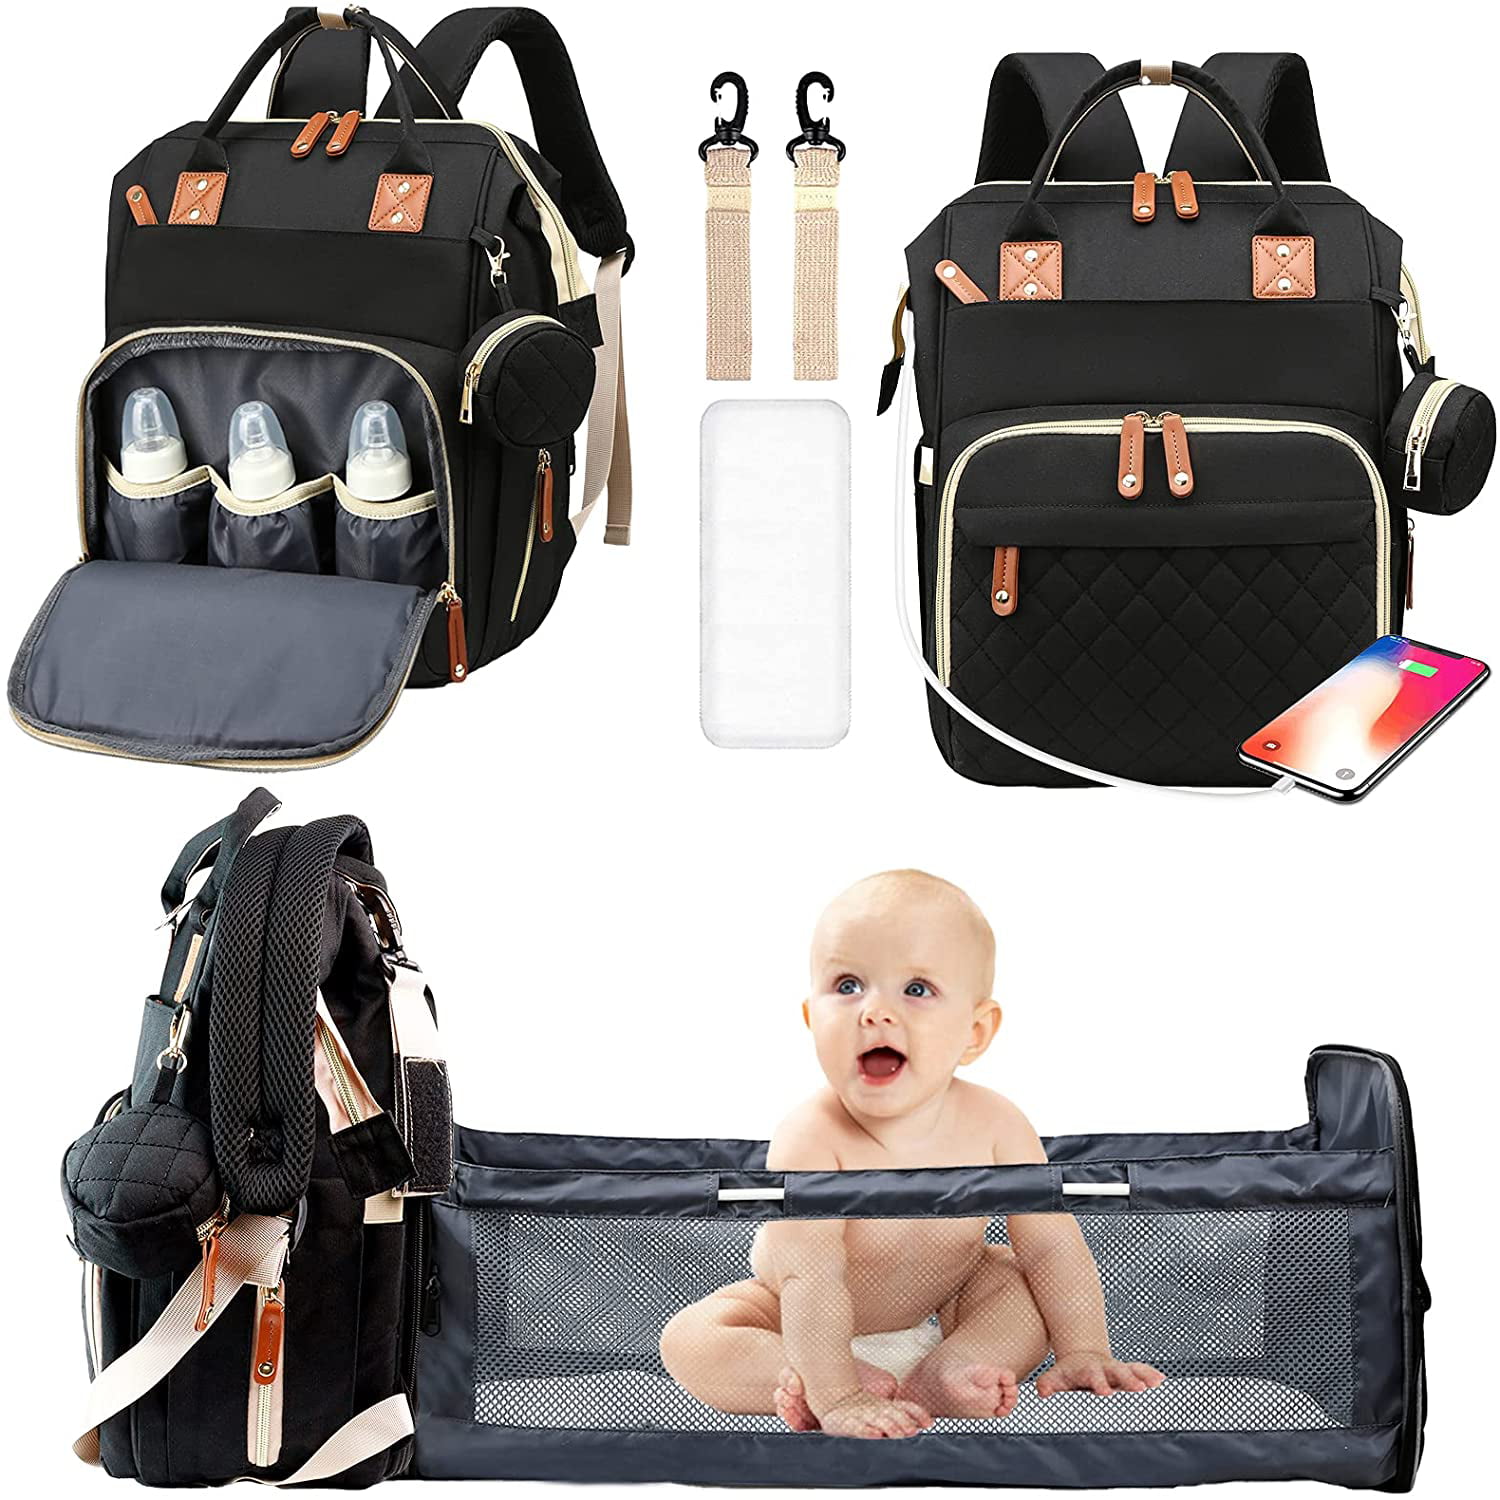 7AM Voyage Diaper Bag Backpack - Unisex Multifunctional Waterproof Travel  Bag, Large Capacity Carry on Backpack with Padded Shoulder Straps, Newborn